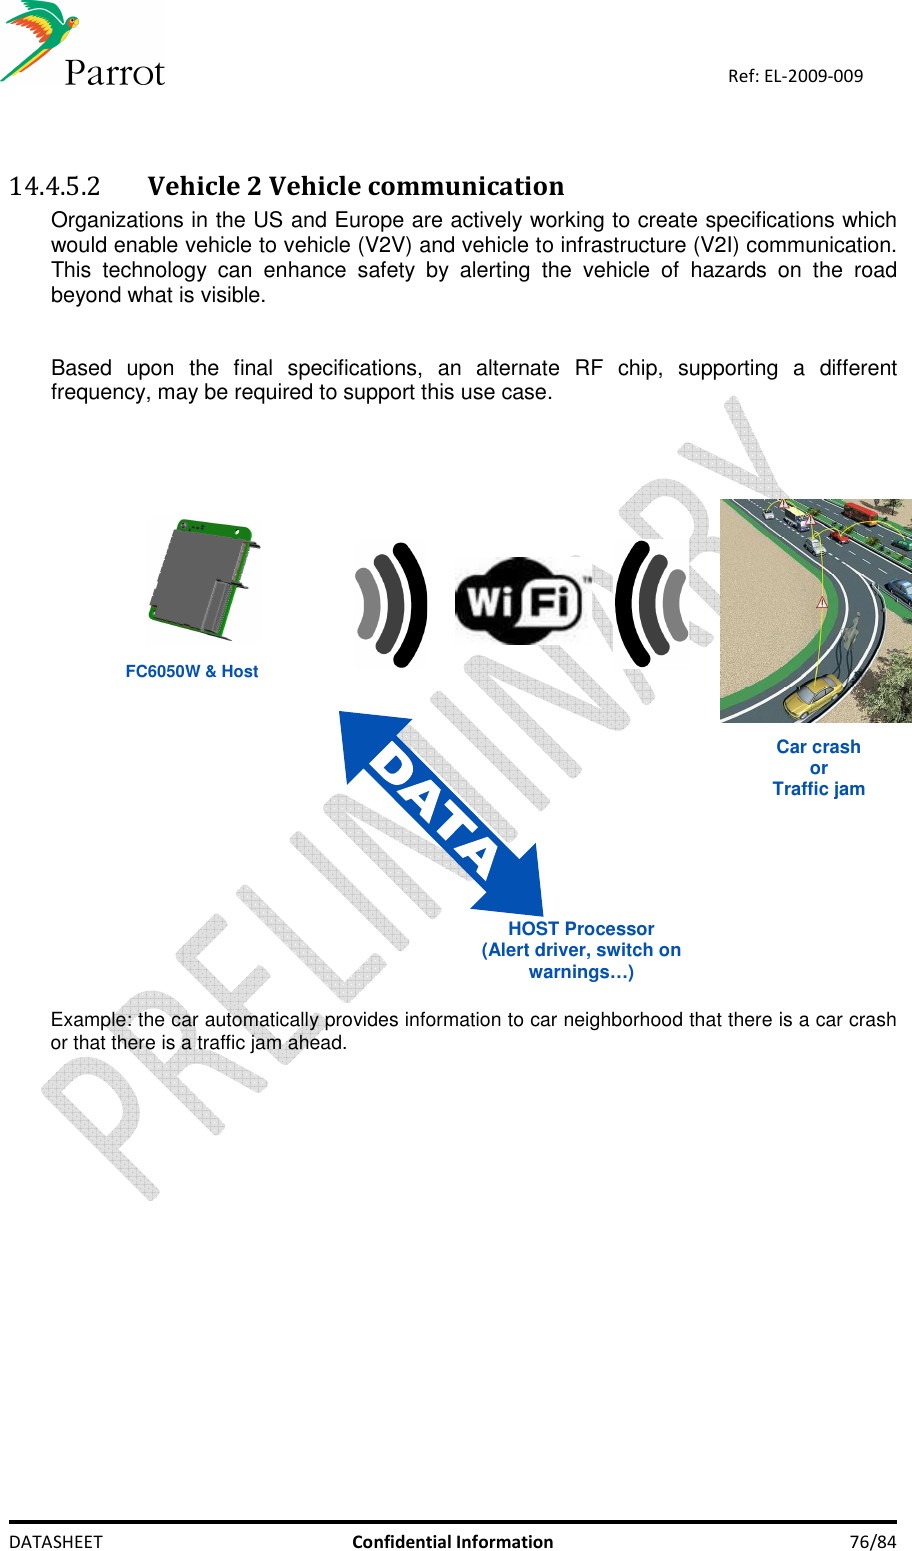    DATASHEET  Confidential Information  76/84 Ref: EL-2009-009   14.4.5.2 Vehicle 2 Vehicle communication  Organizations in the US and Europe are actively working to create specifications which would enable vehicle to vehicle (V2V) and vehicle to infrastructure (V2I) communication. This  technology  can  enhance  safety  by  alerting  the  vehicle  of  hazards  on  the  road beyond what is visible.  Based  upon  the  final  specifications,  an  alternate  RF  chip,  supporting  a  different frequency, may be required to support this use case.  Car crash or Traffic jam HOST Processor (Alert driver, switch on warnings…) FC6050W &amp; Host   Example: the car automatically provides information to car neighborhood that there is a car crash or that there is a traffic jam ahead.  